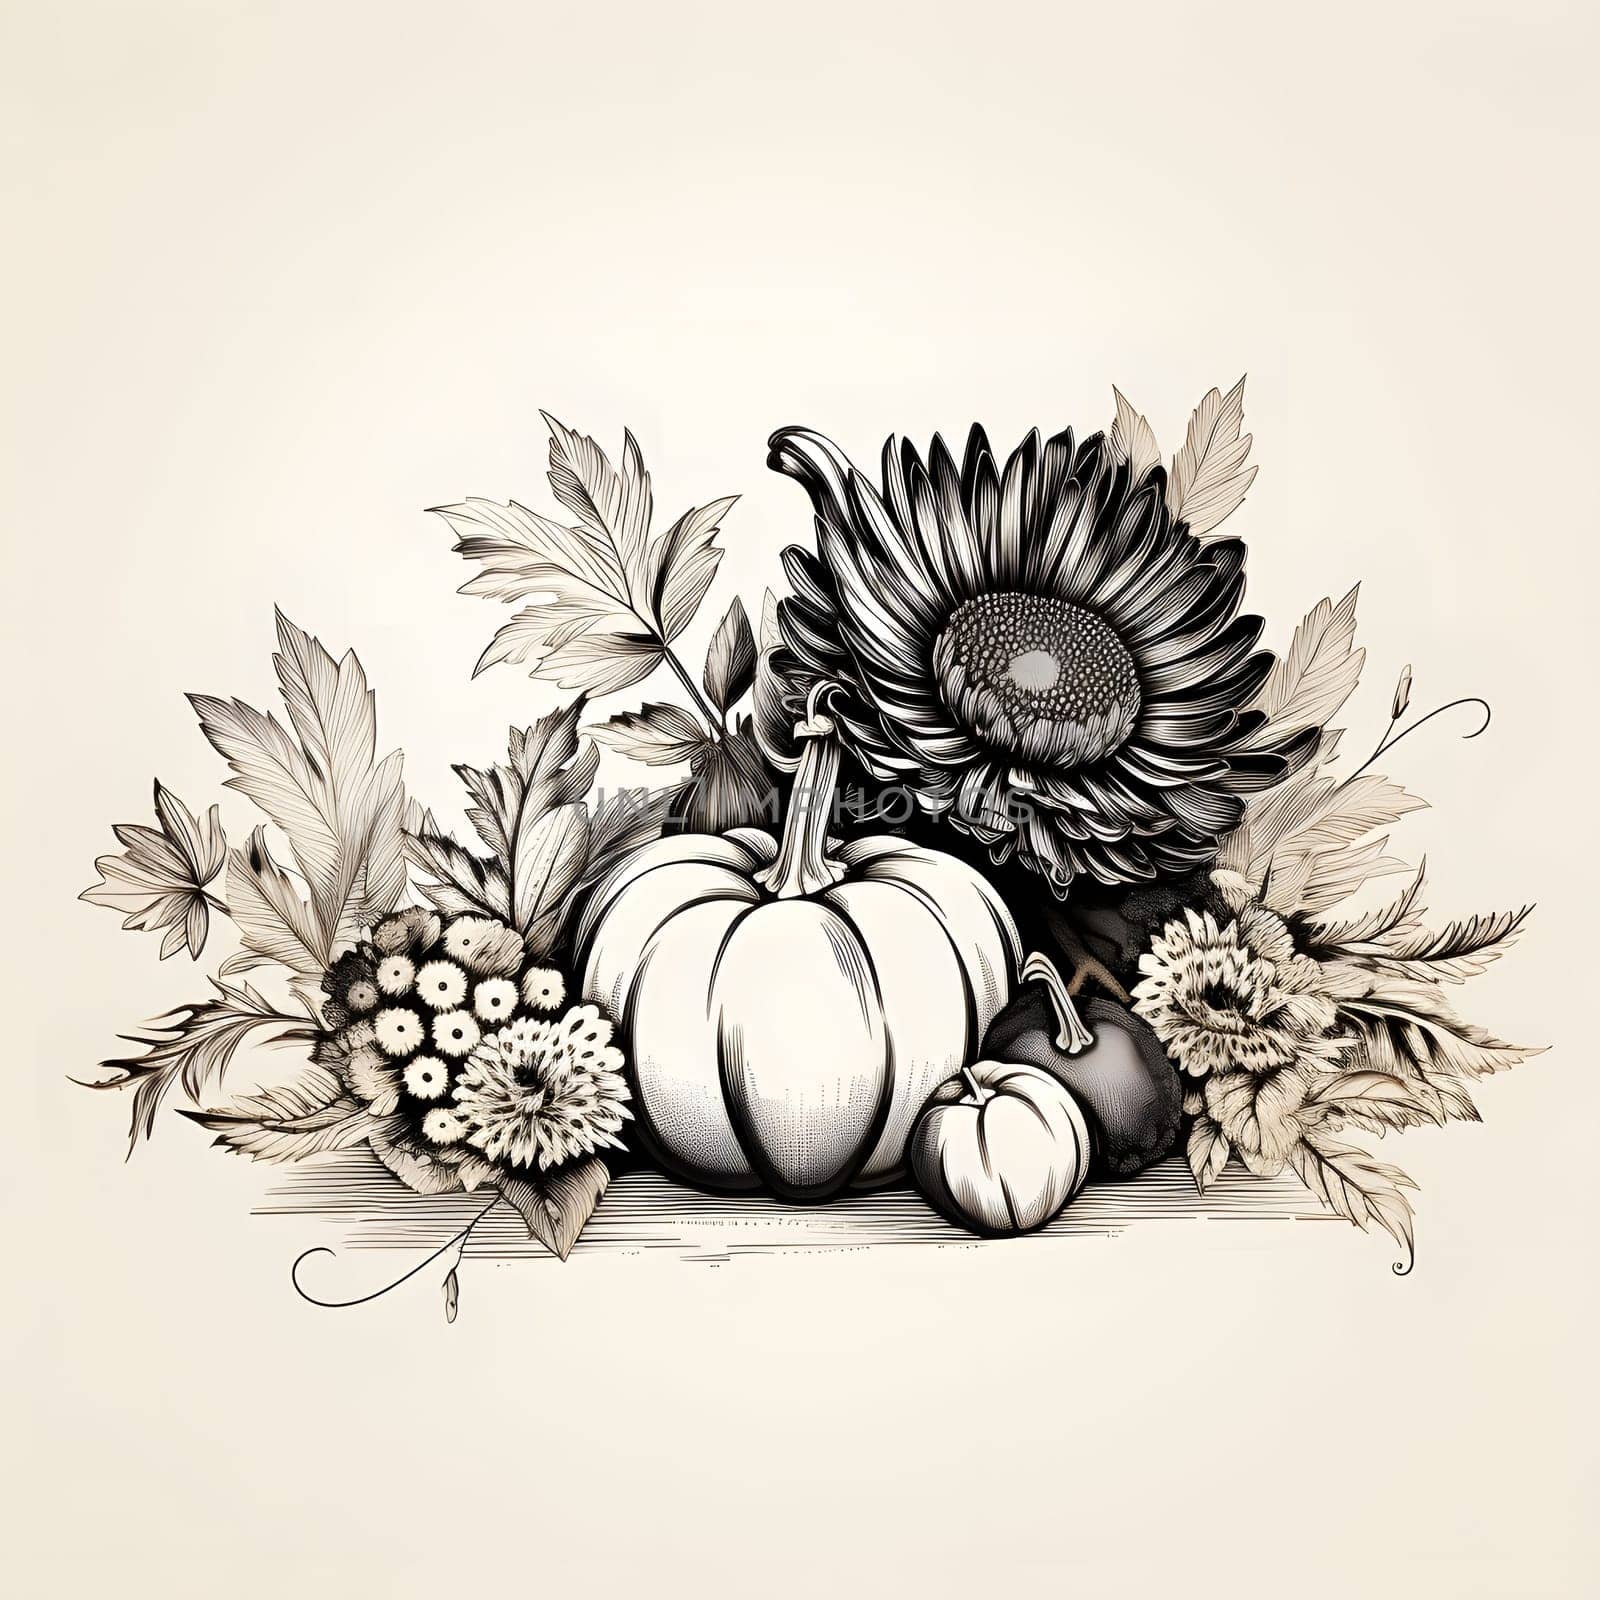 Black and white; pumpkins flowers leaves uniform isolated background. Pumpkin as a dish of thanksgiving for the harvest. by ThemesS